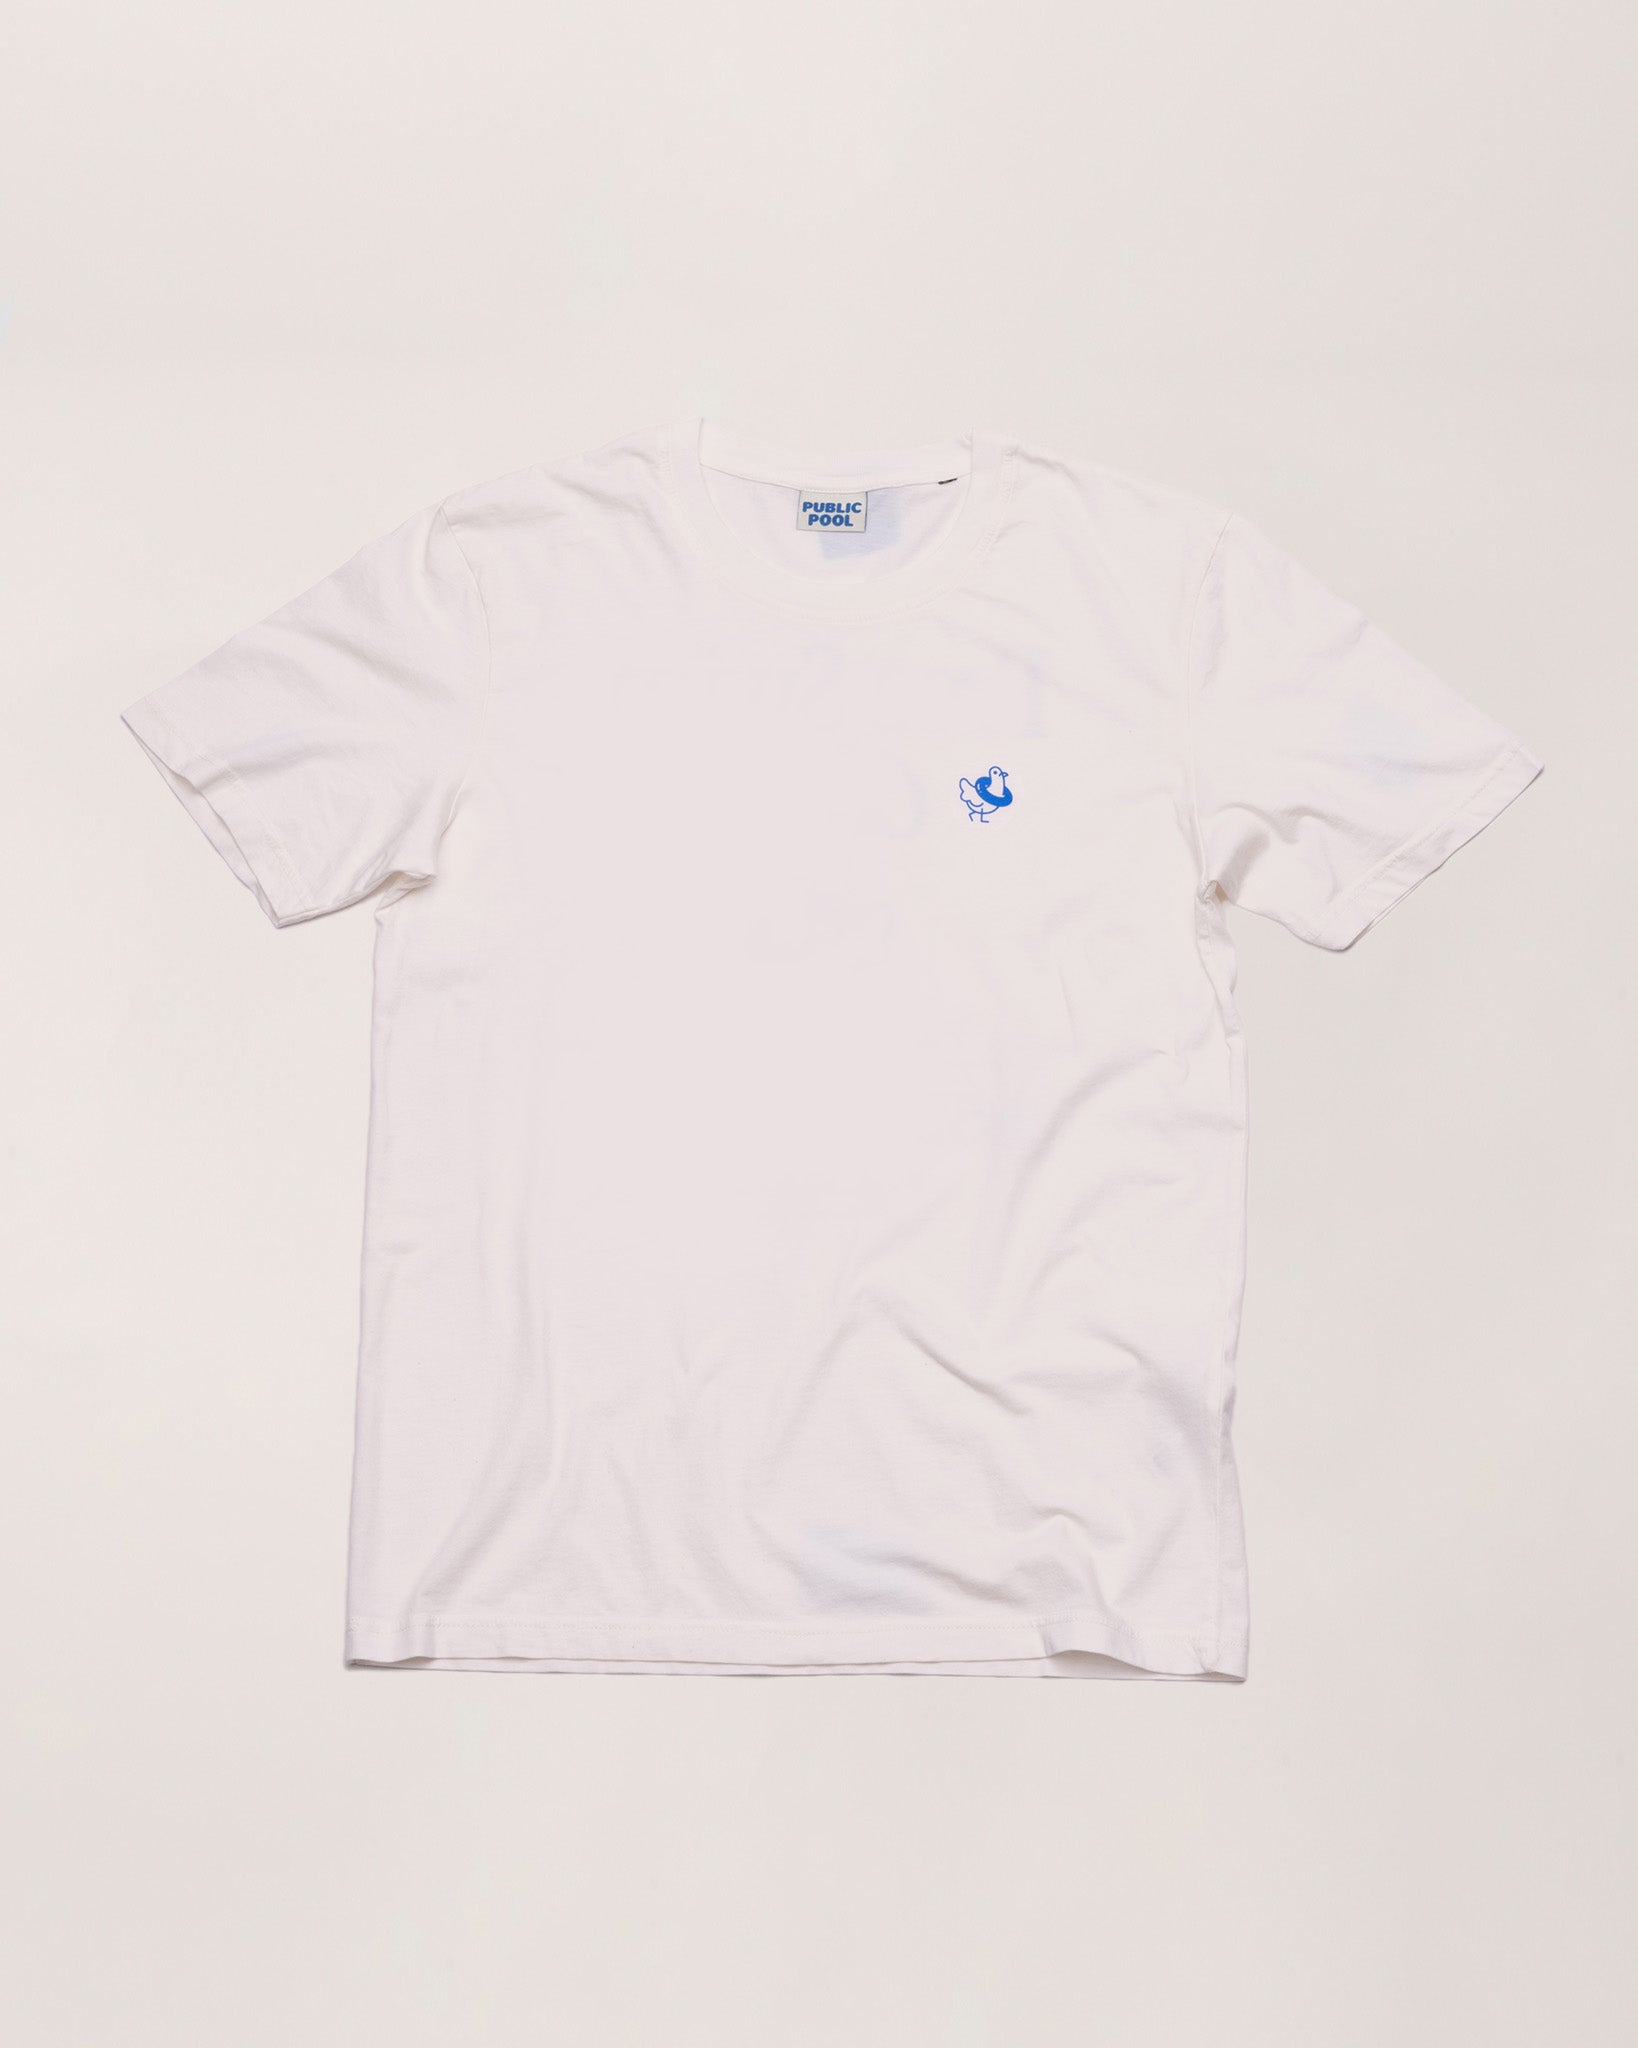 A white shirt with a blue Public Pool icon. 